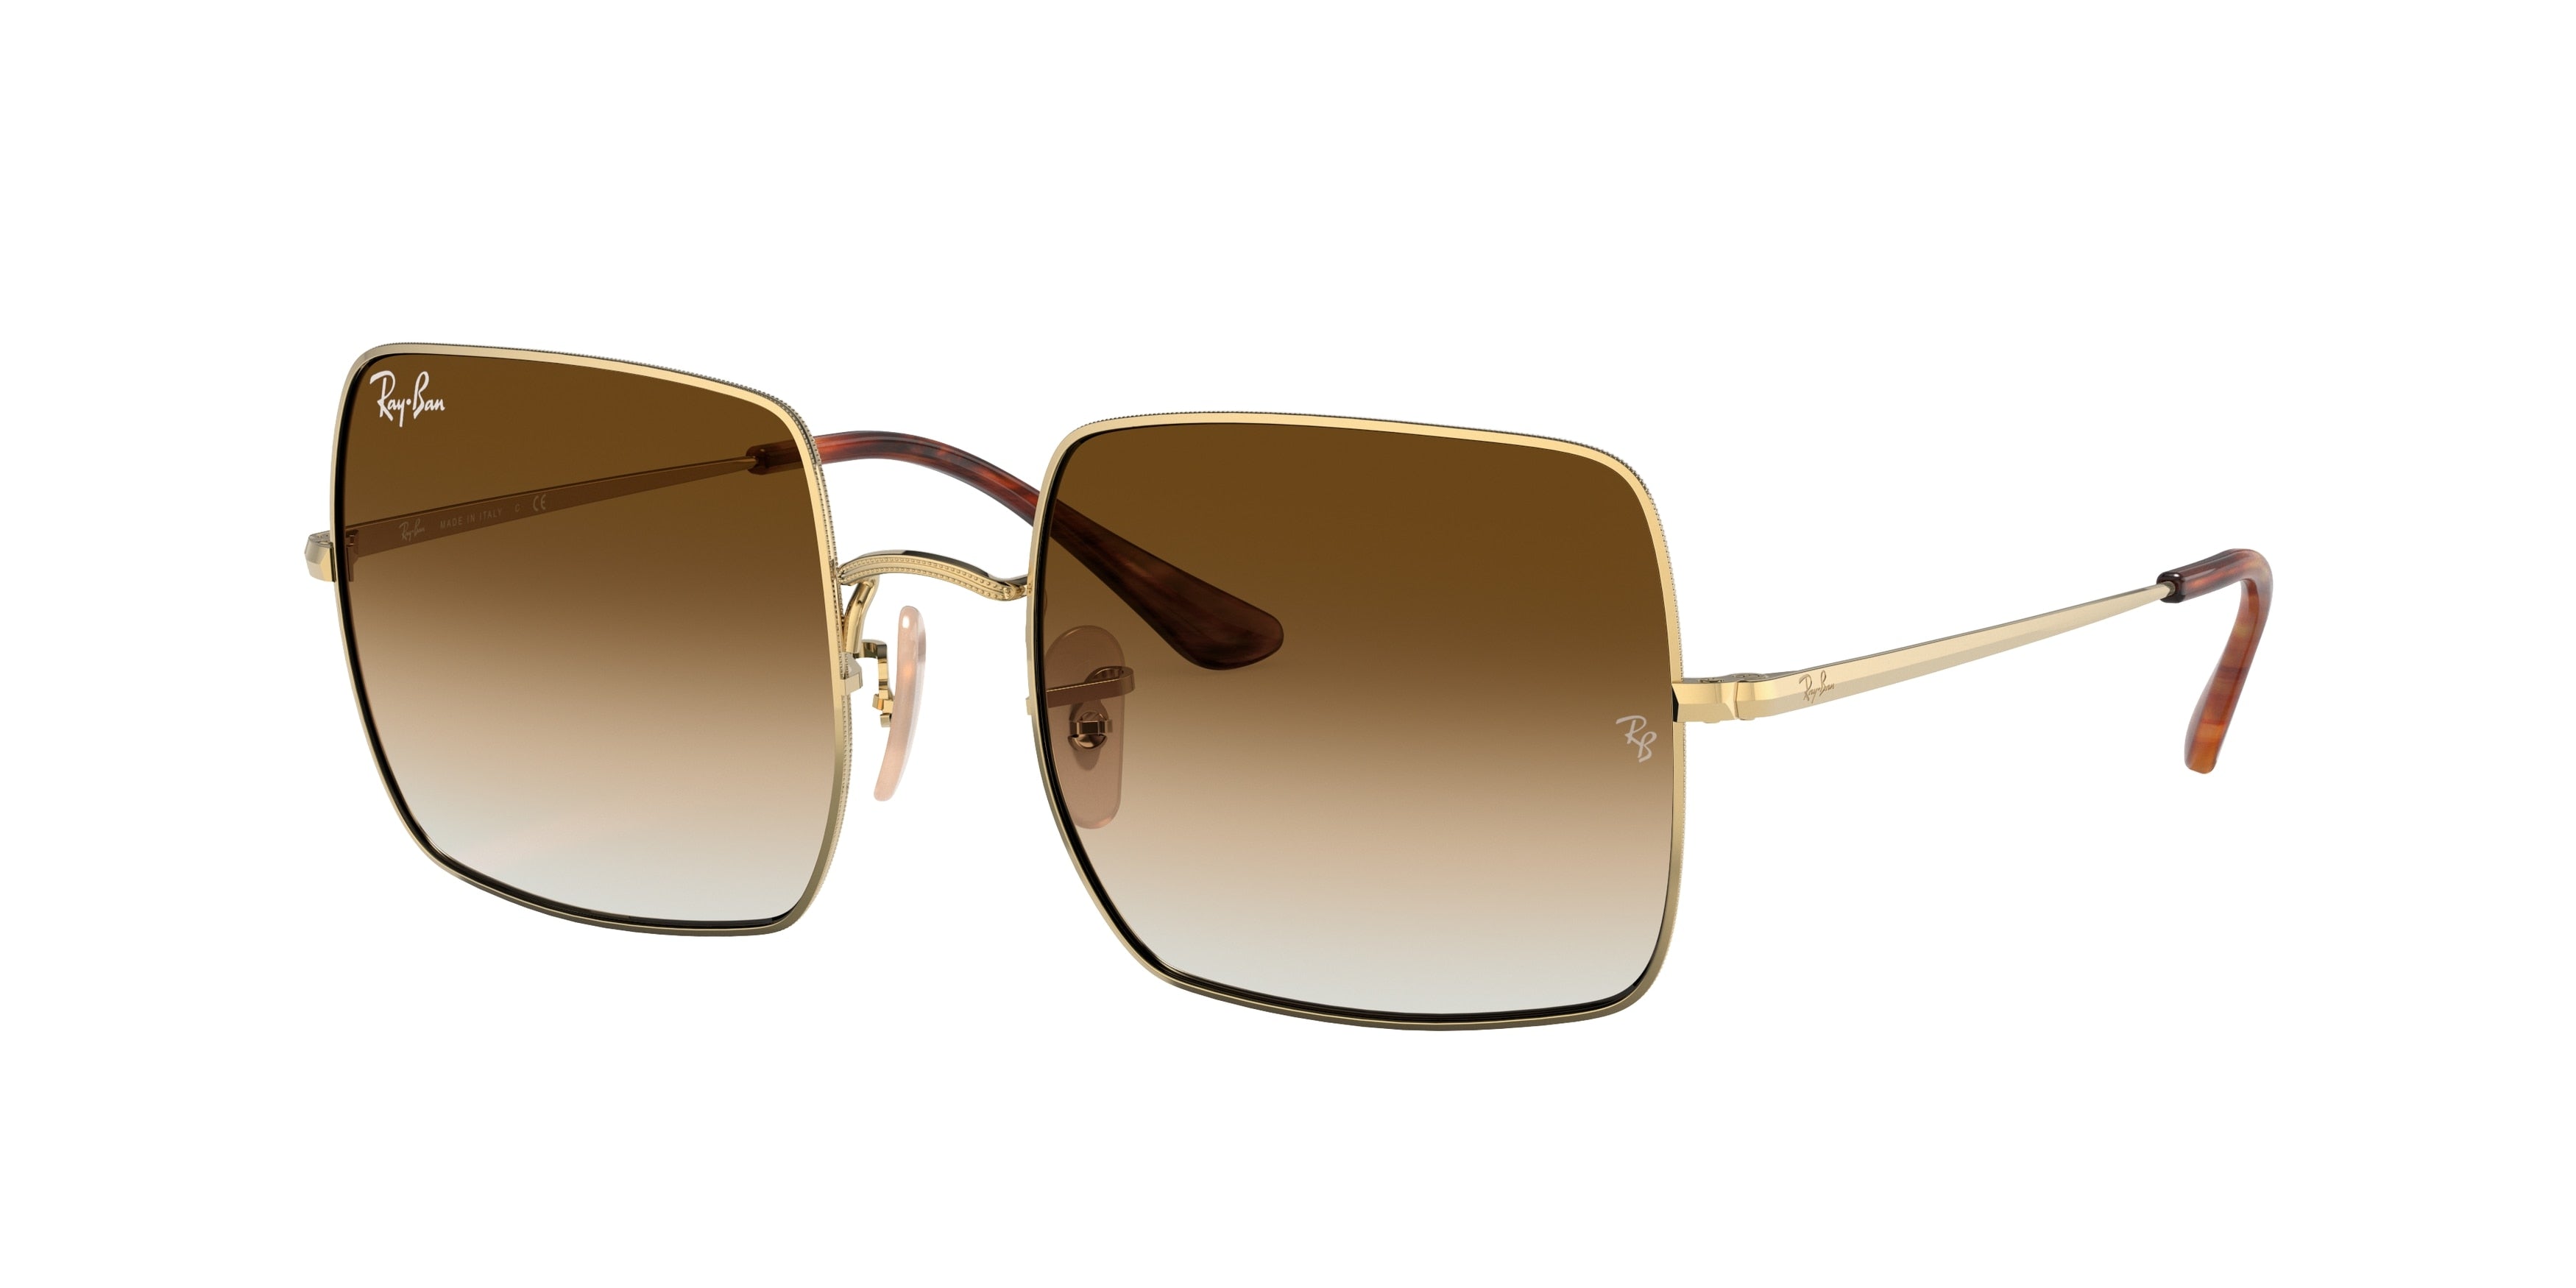 Ray-Ban SQUARE RB1971 Square Sunglasses  914751-Gold 54-145-19 - Color Map Gold